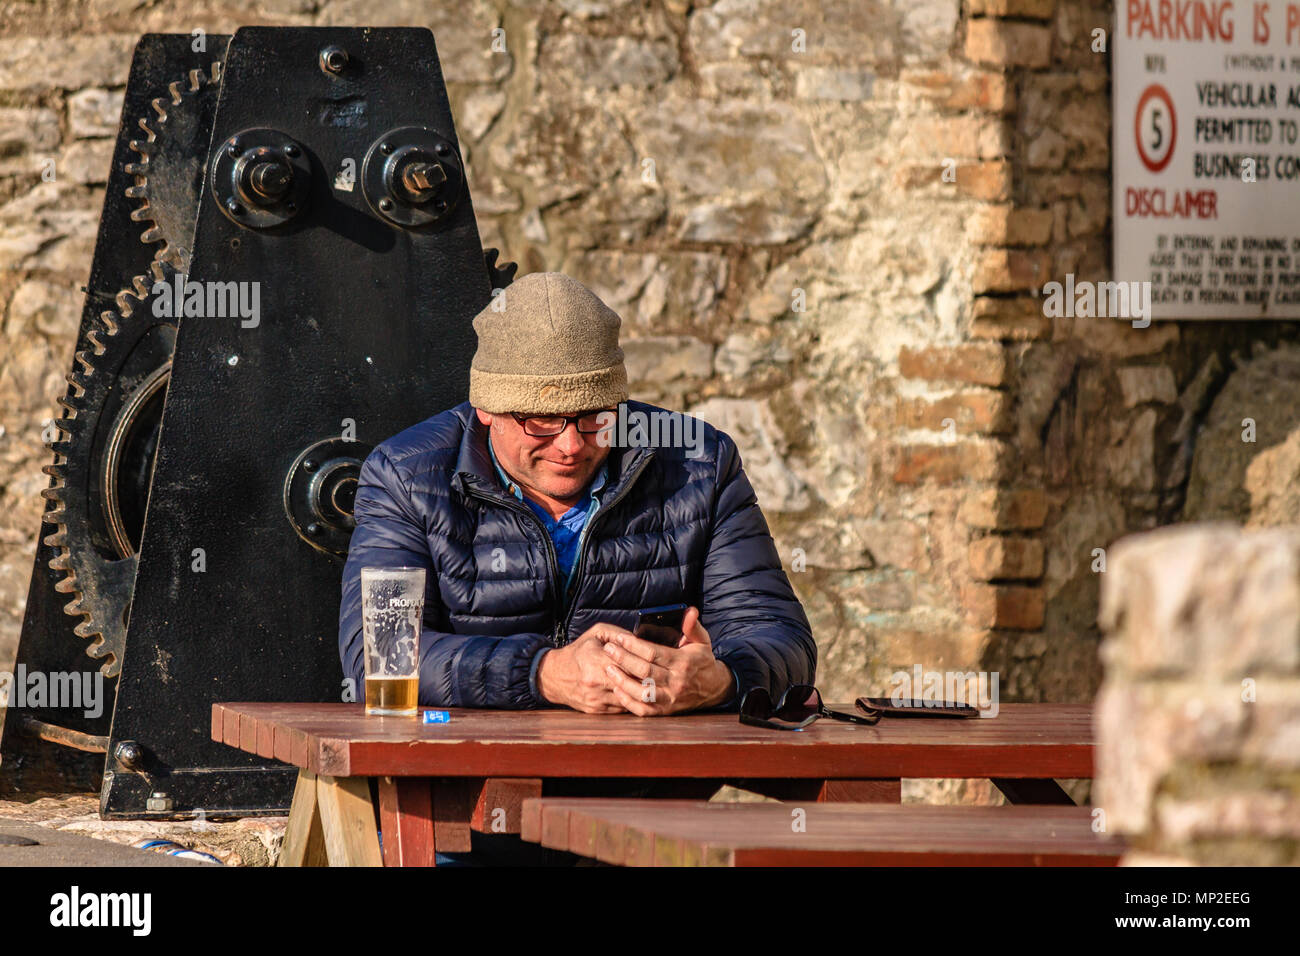 Man in warm coat and hat sat outside a pub with a nearly finished pint of beer and using a mobile phone. Teignmouth, Devon. Feb 2018. Stock Photo